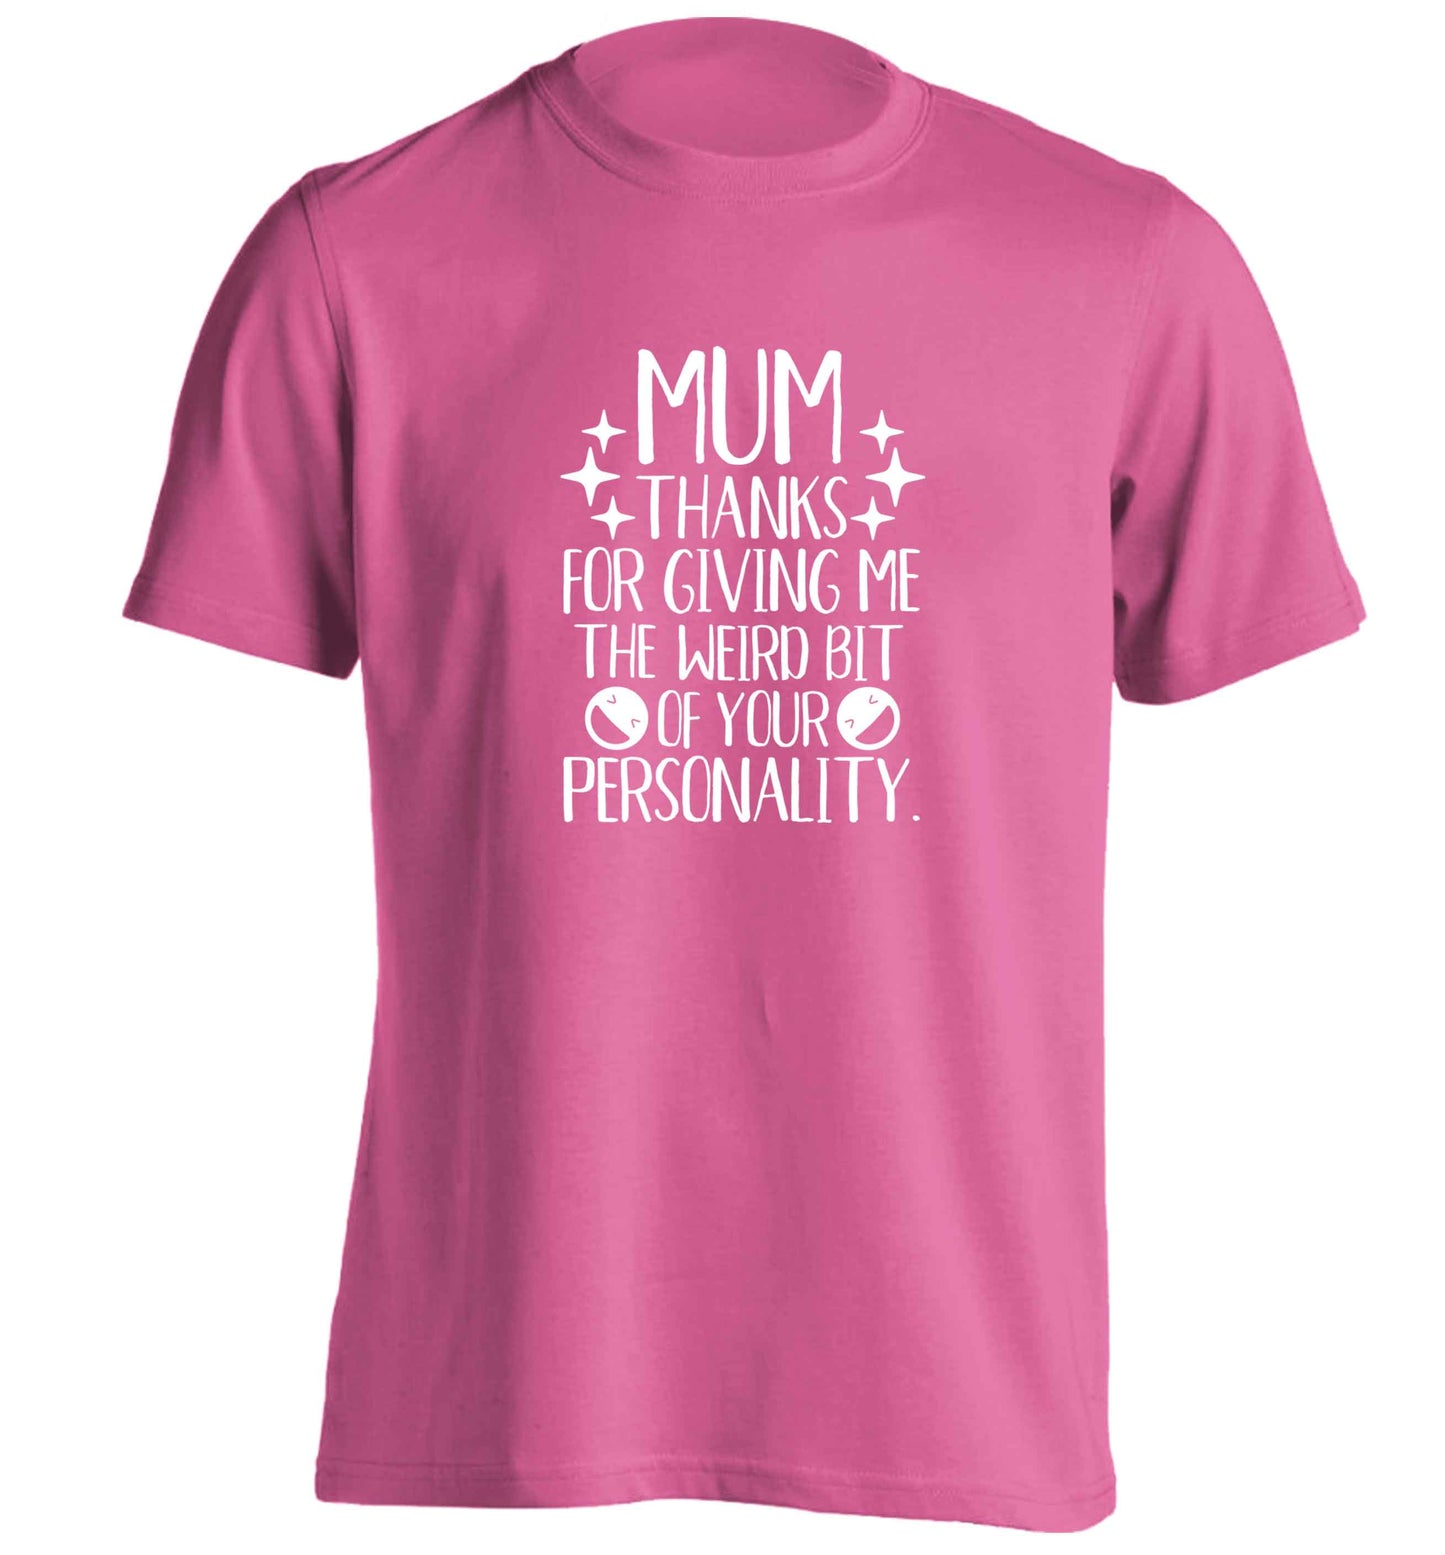 Mum thanks for giving me the weird bit of your personality adults unisex pink Tshirt 2XL